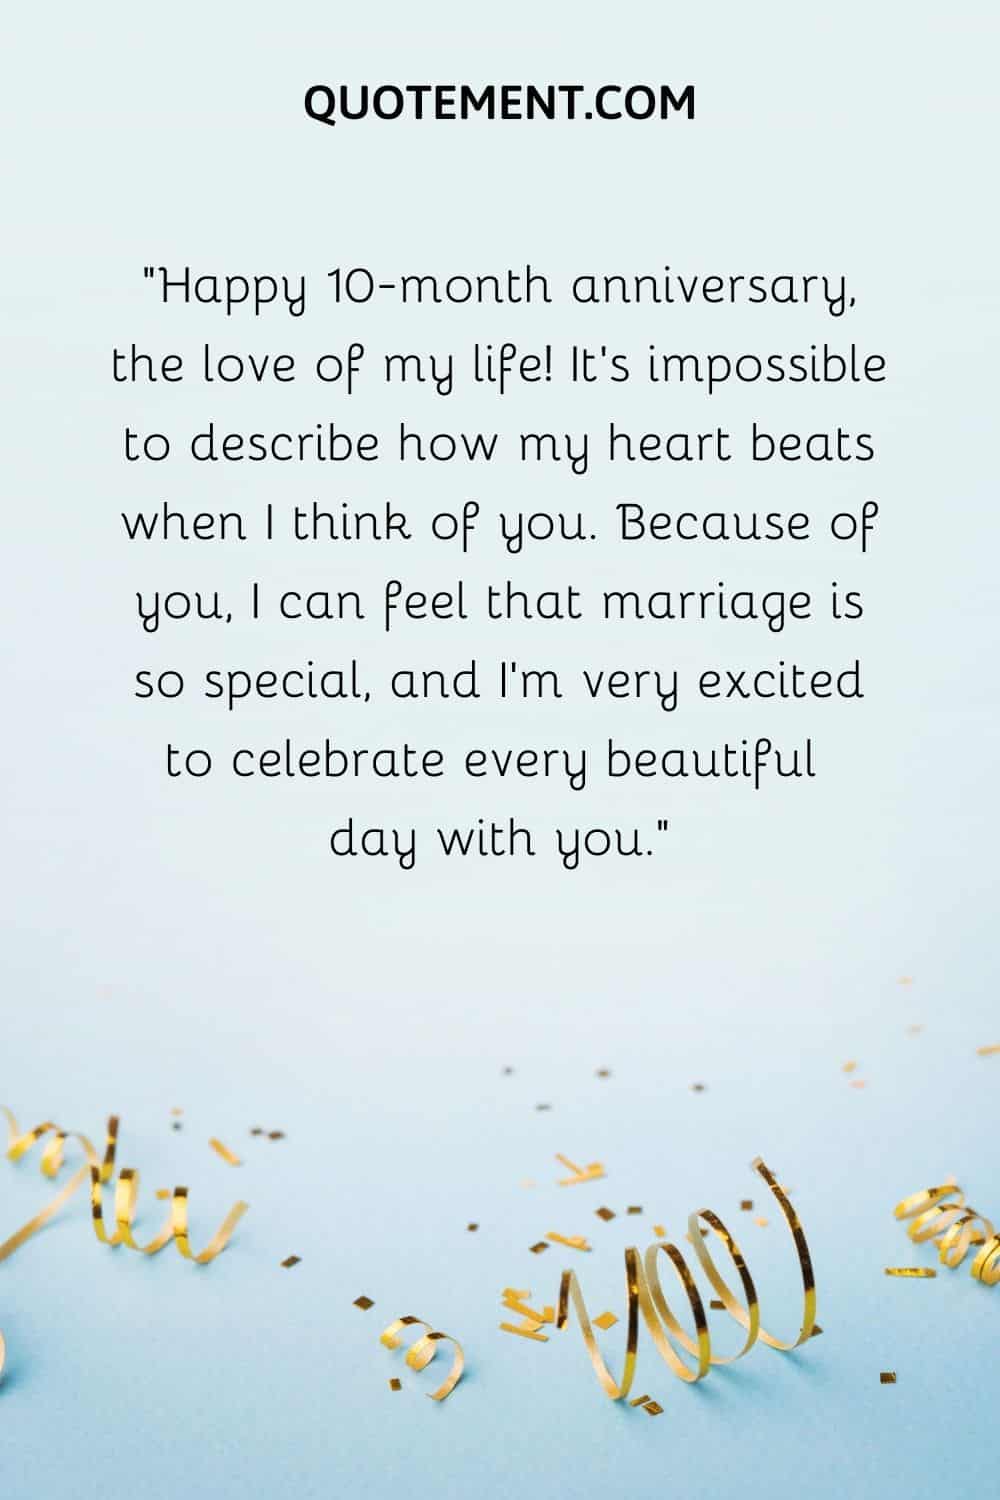 Because of you, I can feel that marriage is so special, and I’m very excited to celebrate every beautiful day with you